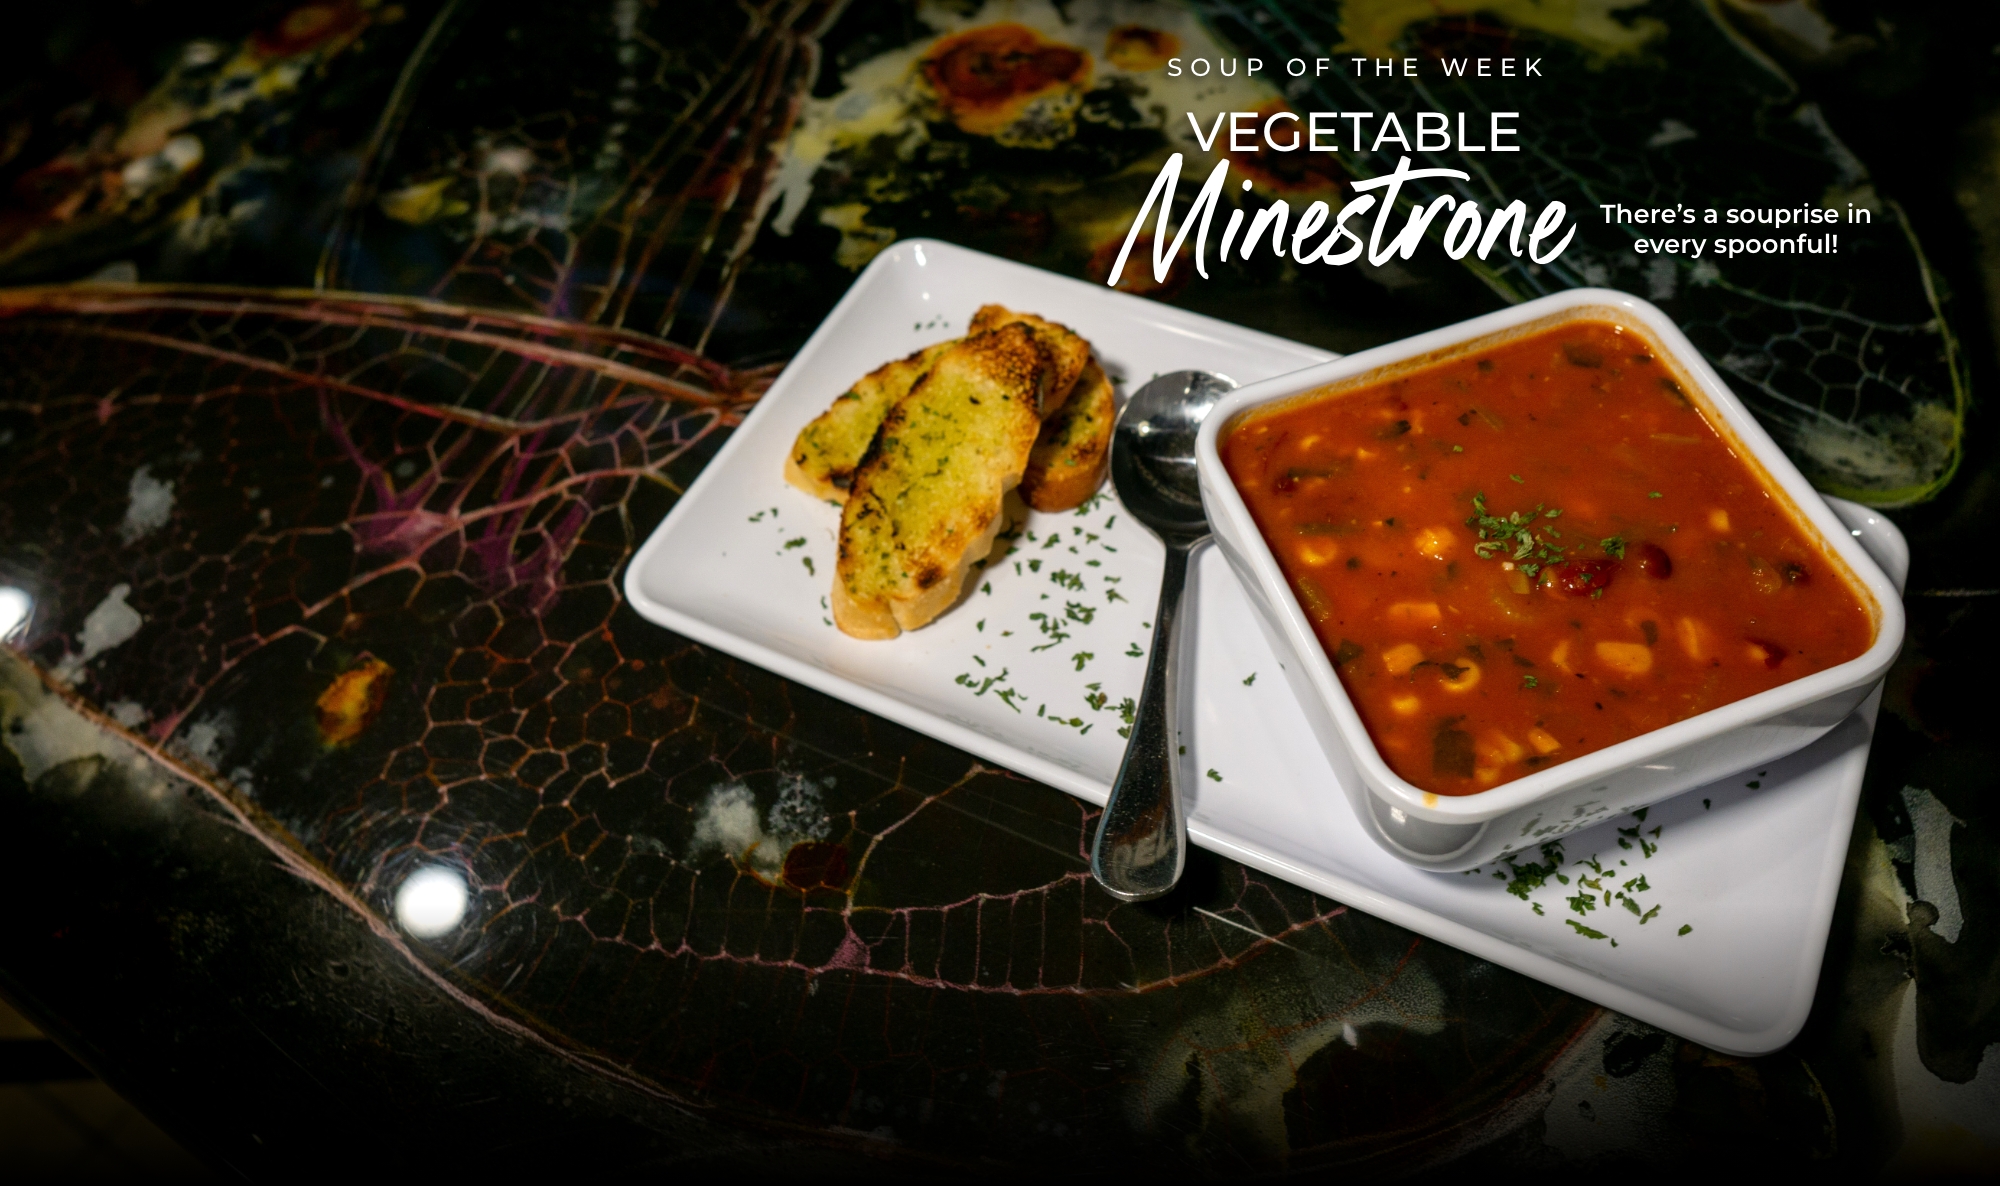 Soup - Vegetable Minestrone